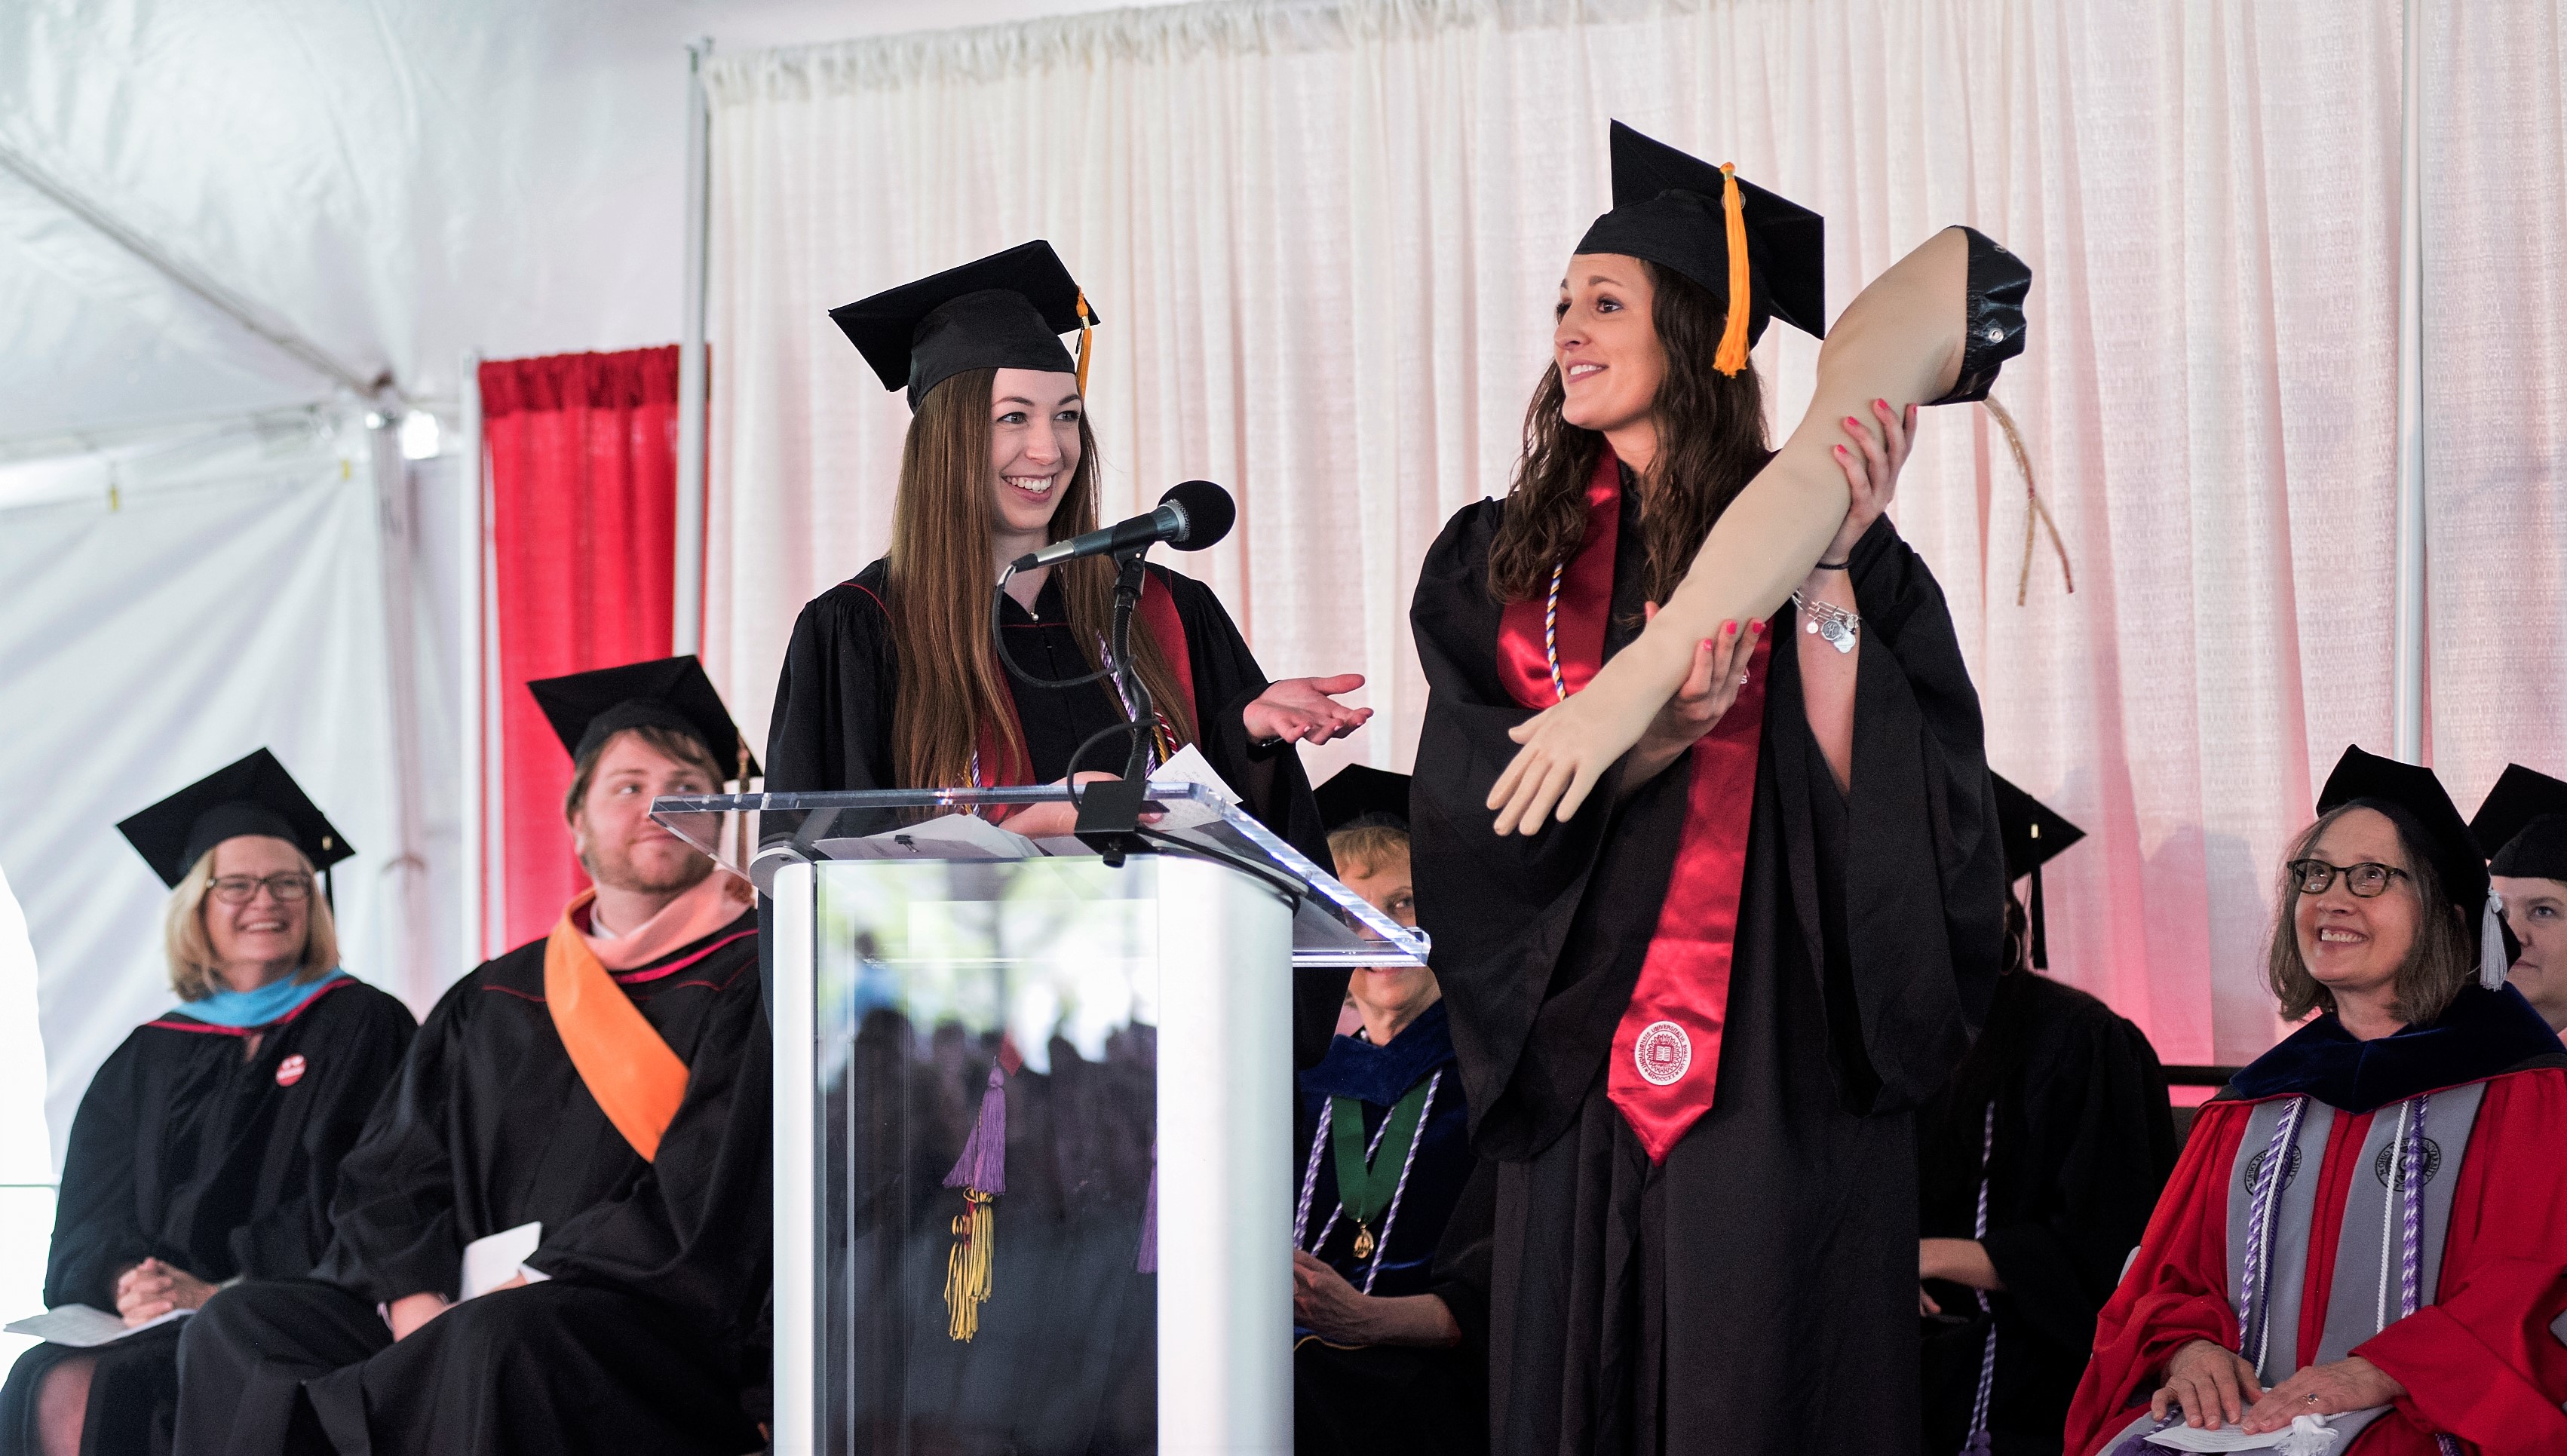 Two students in caps and gowns at graduation ceremony. One is holding a manikin's arm.